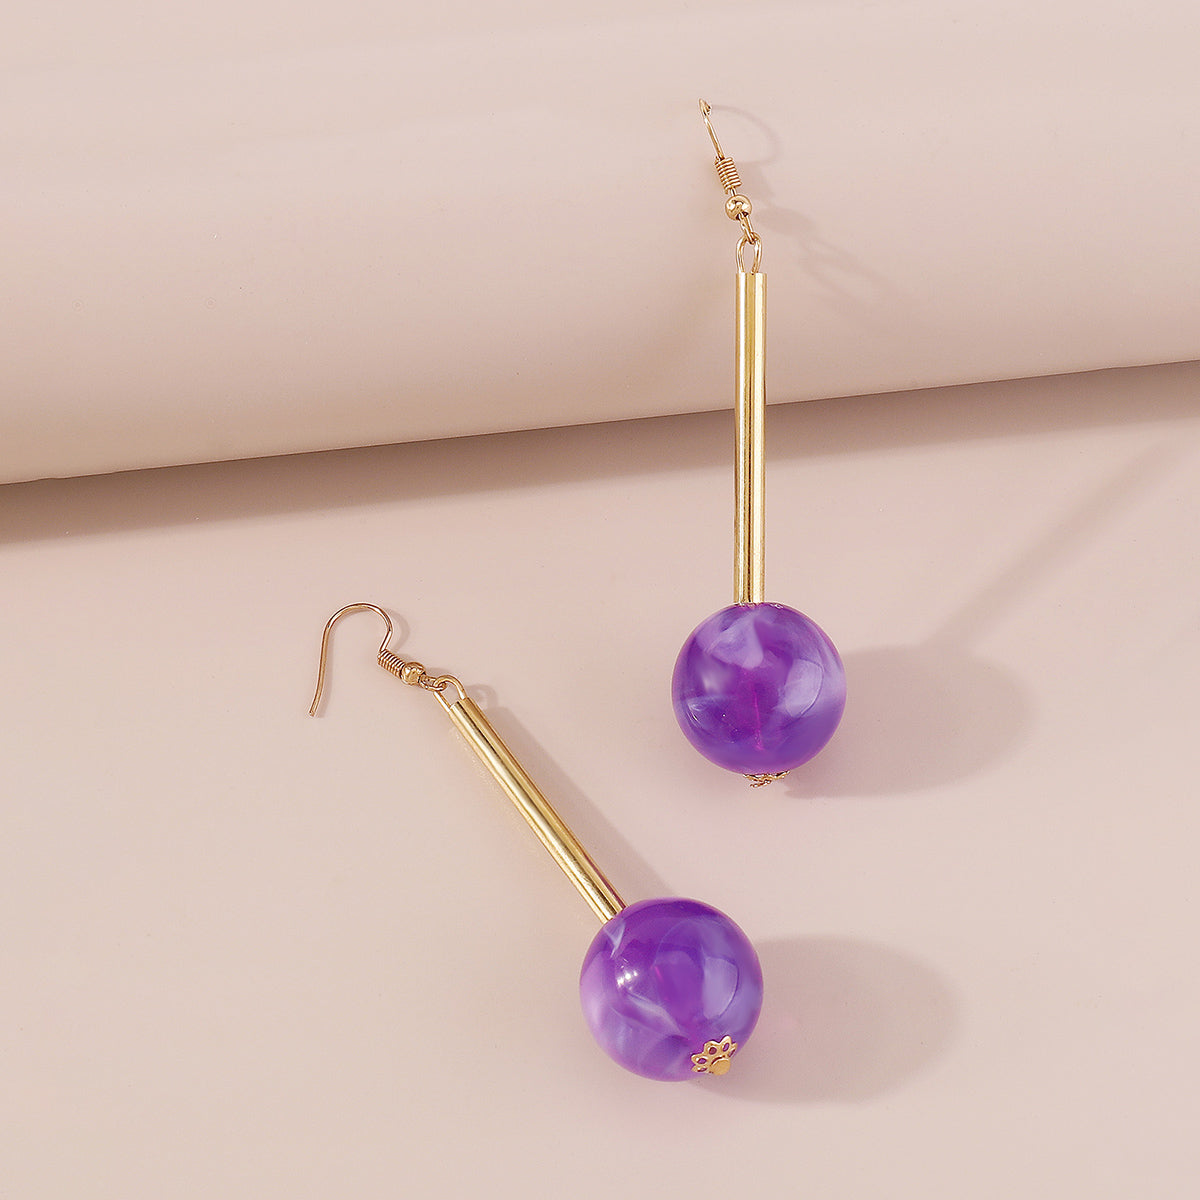 E11517 Candy Color Resin Long Round Ball Drop Earrings